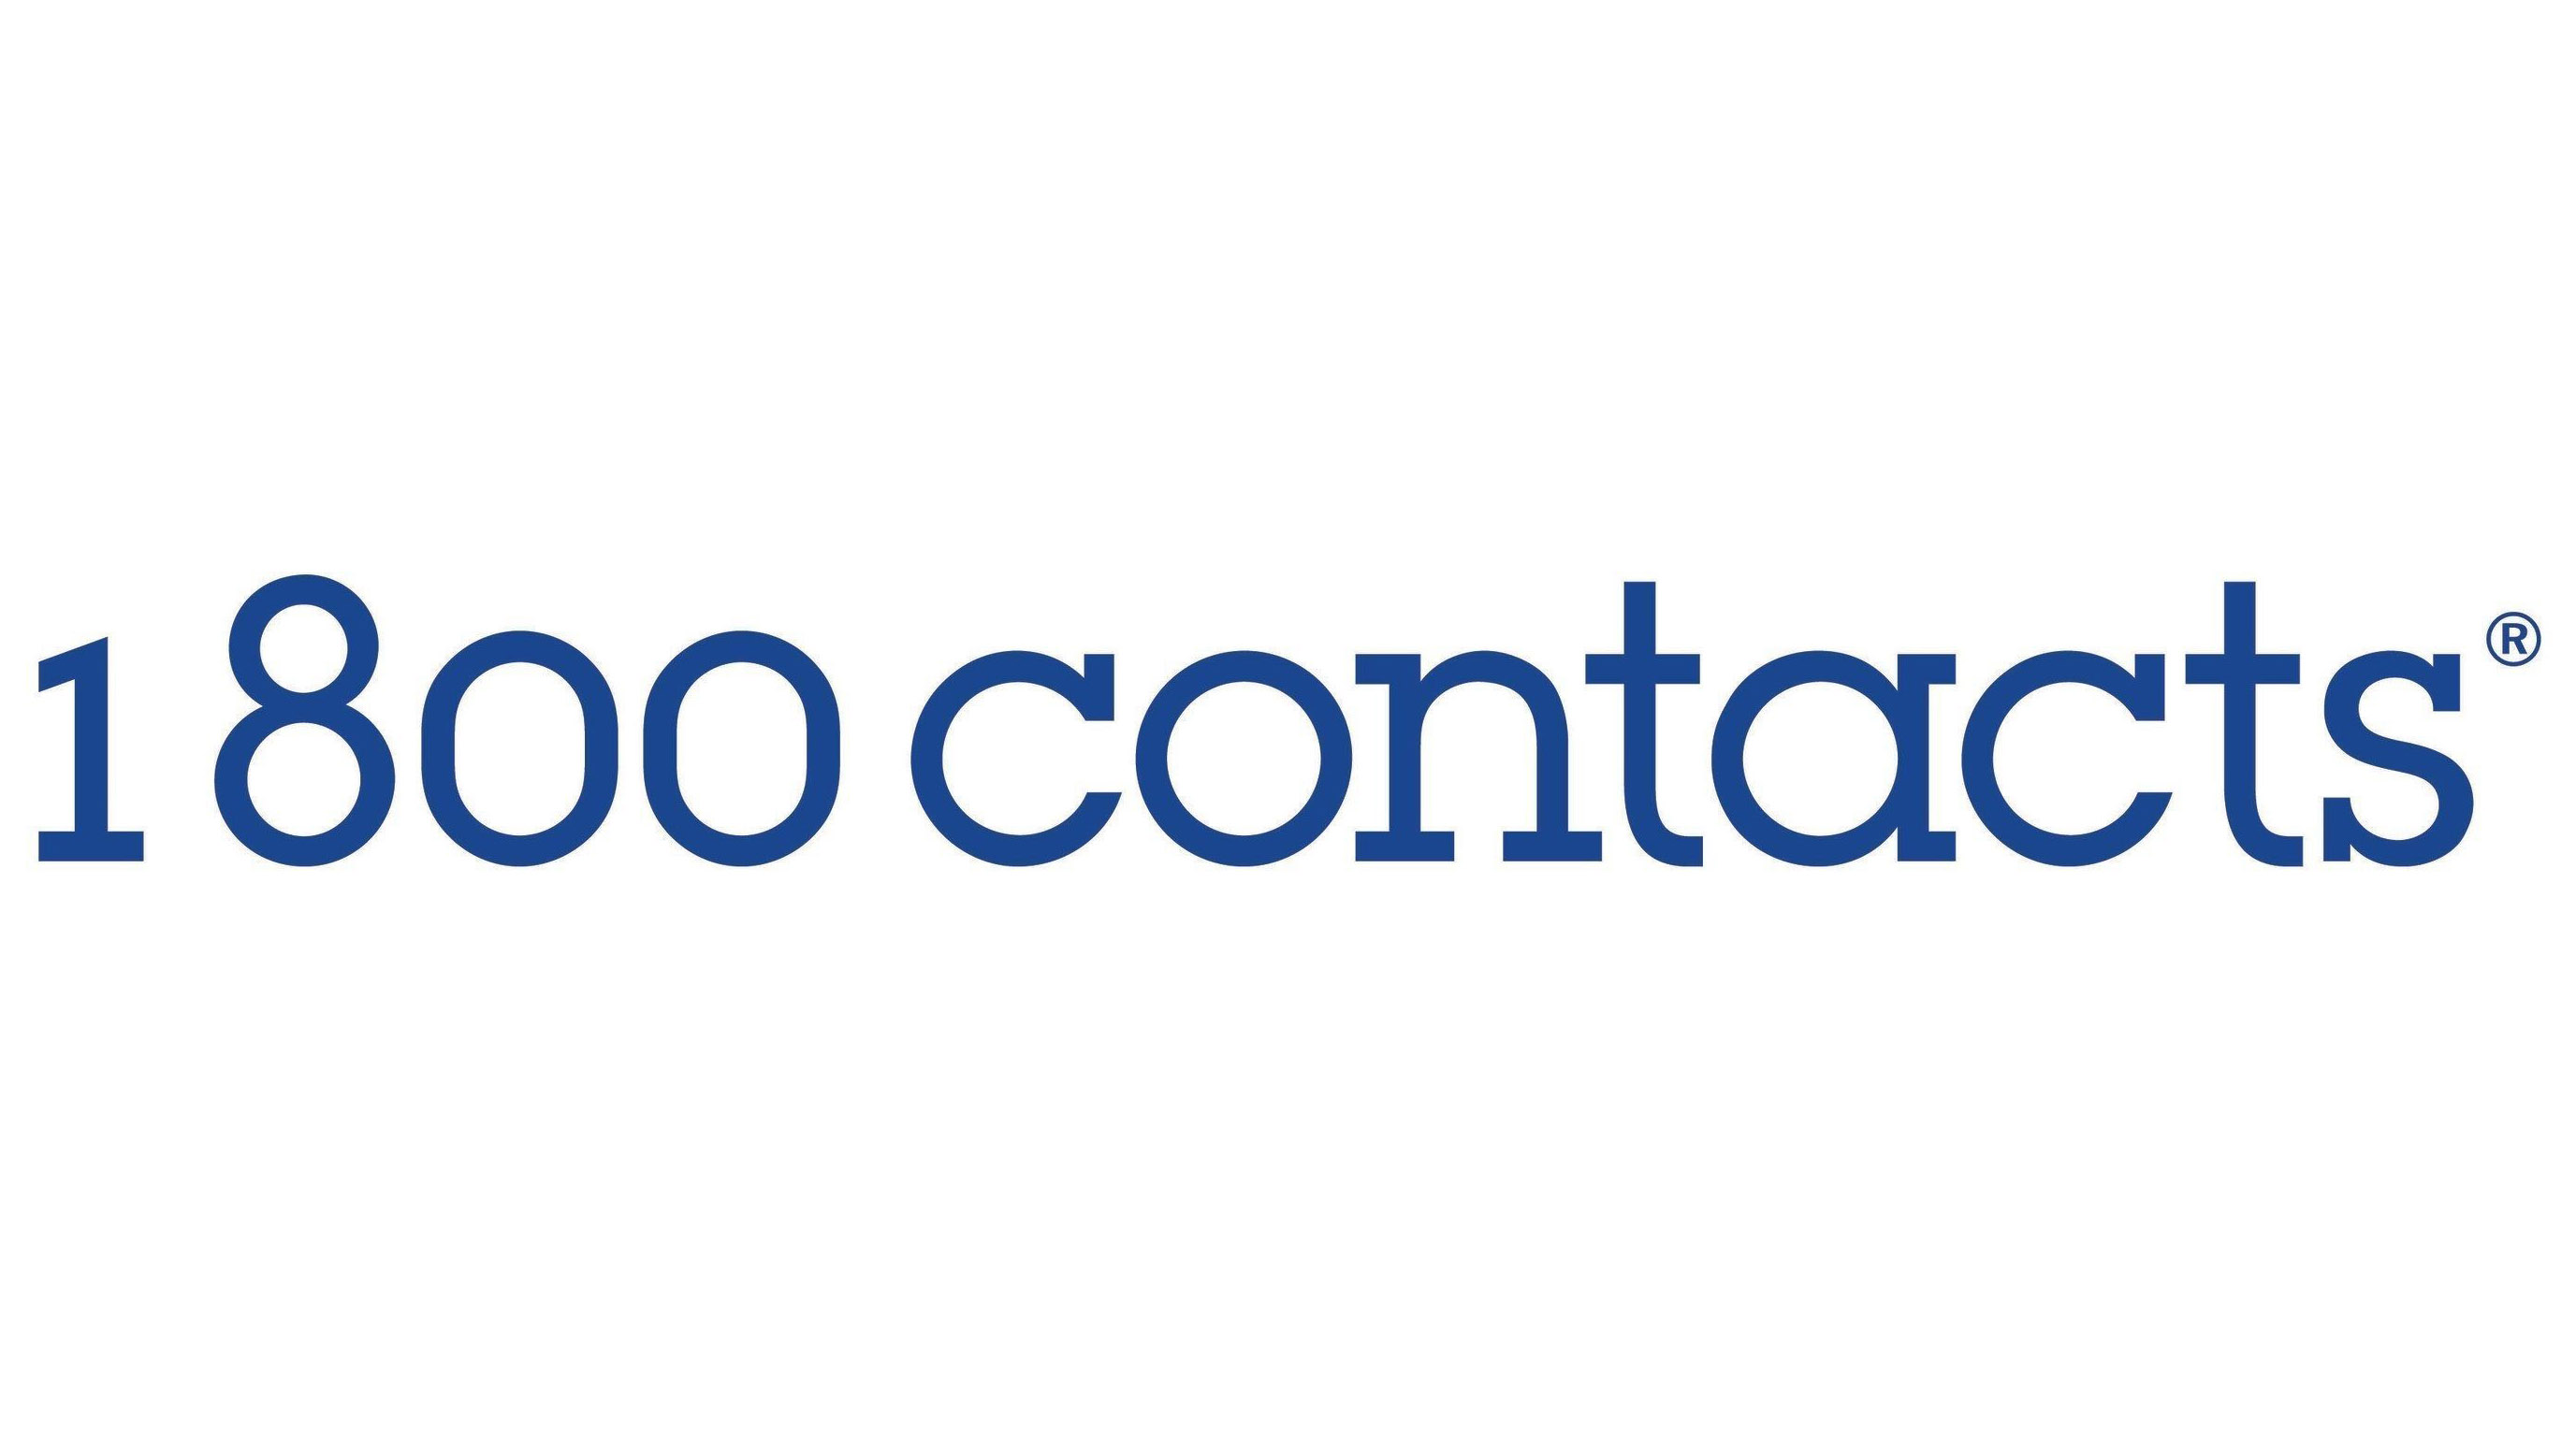 1800-contacts-coupons-promo-codes-deals-august-20200-10-discount